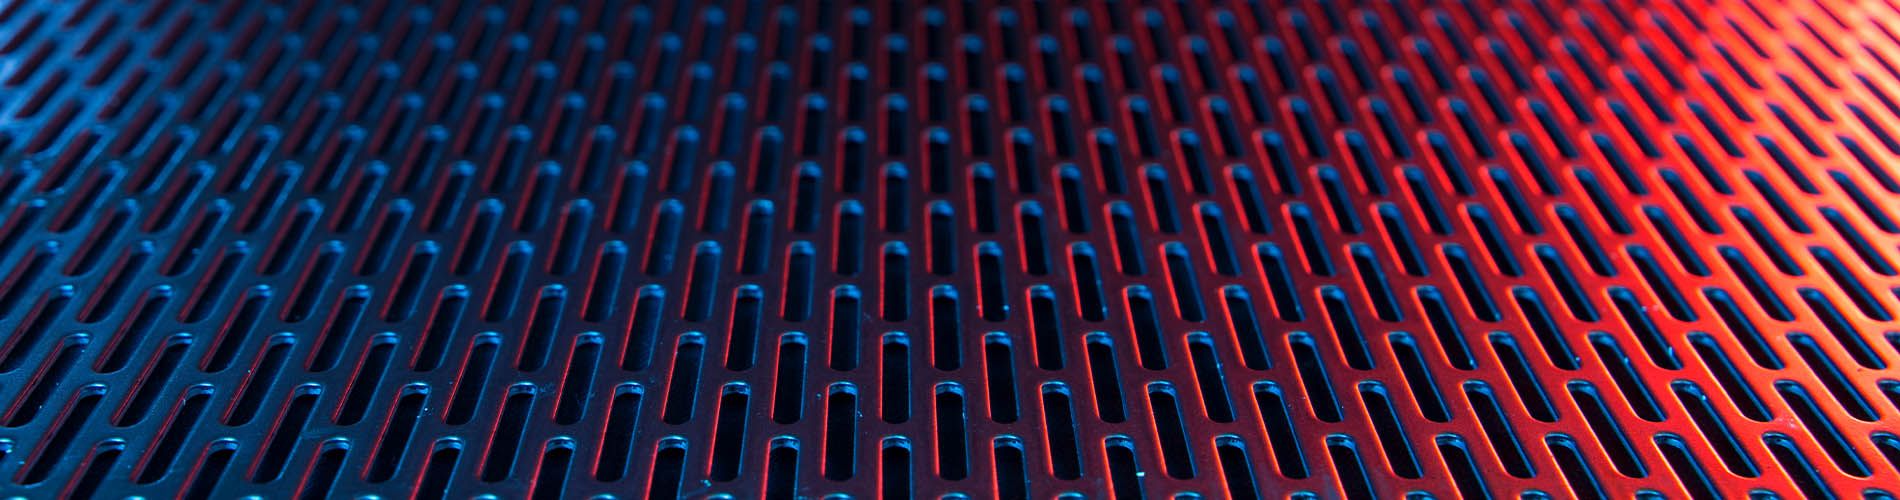 Photo of a sheet of slotted perforated metal with a red lighting over the right side of the sheet.